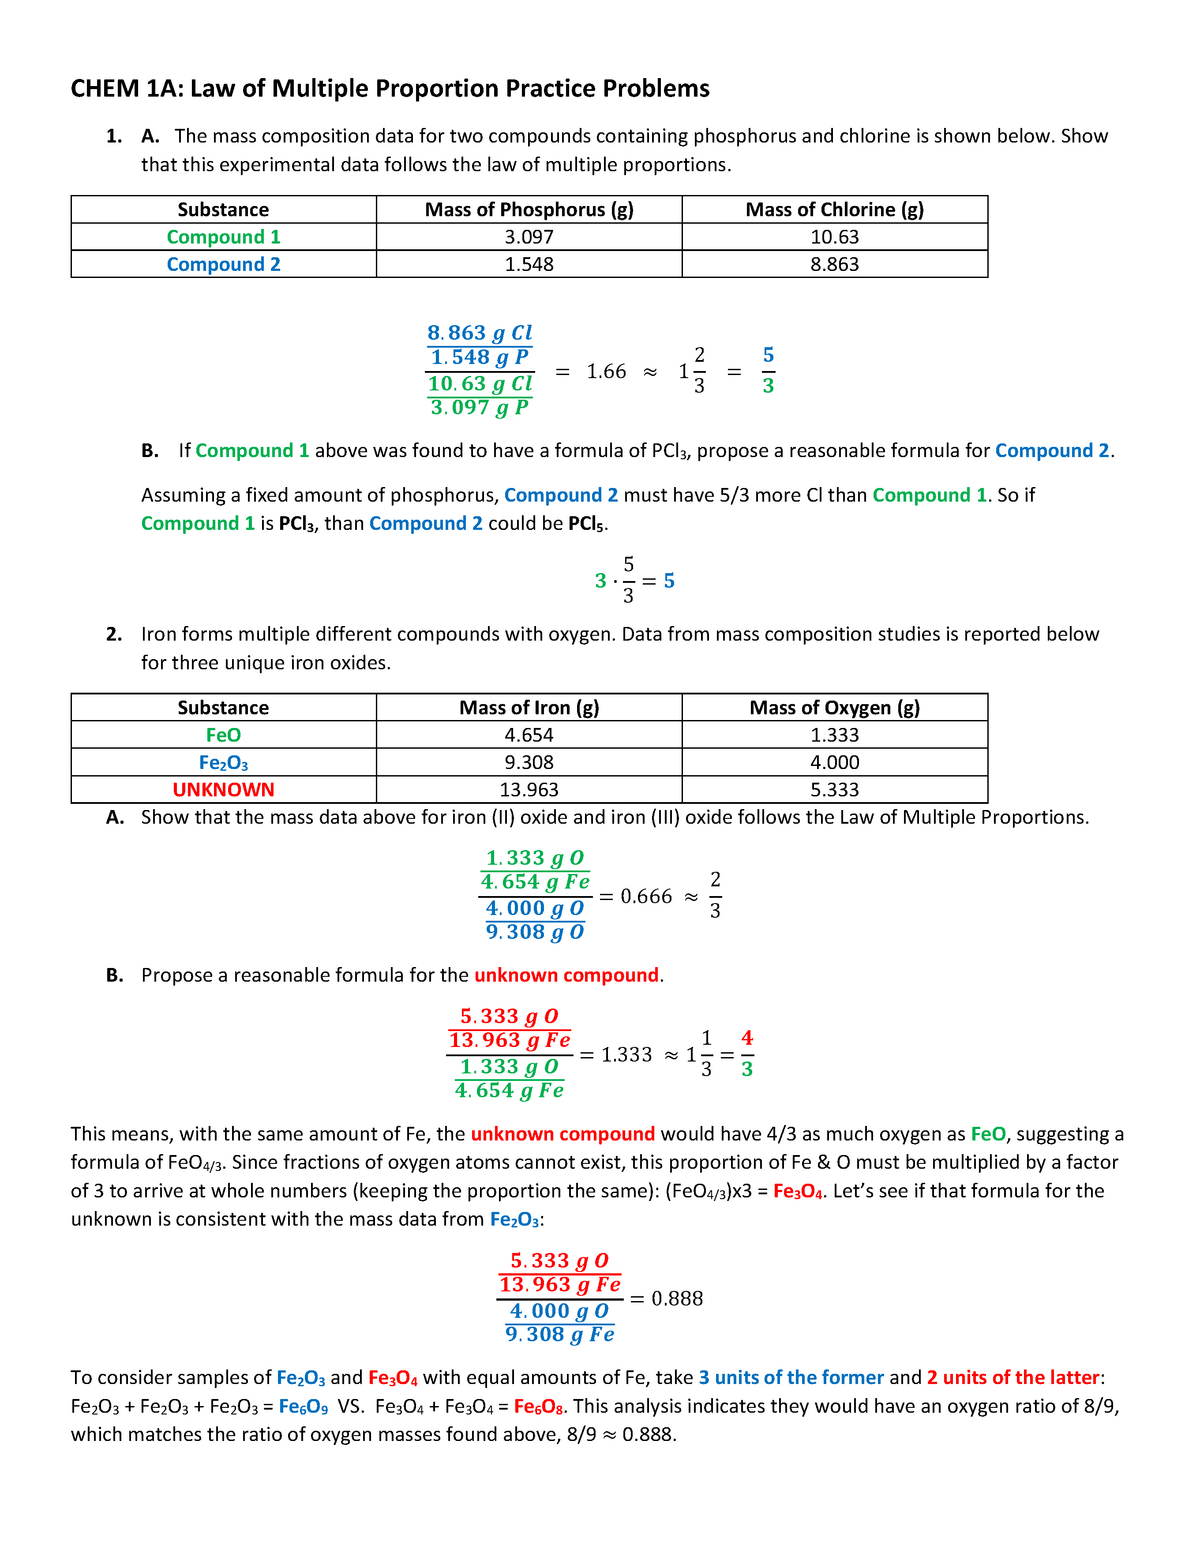 istat test answers